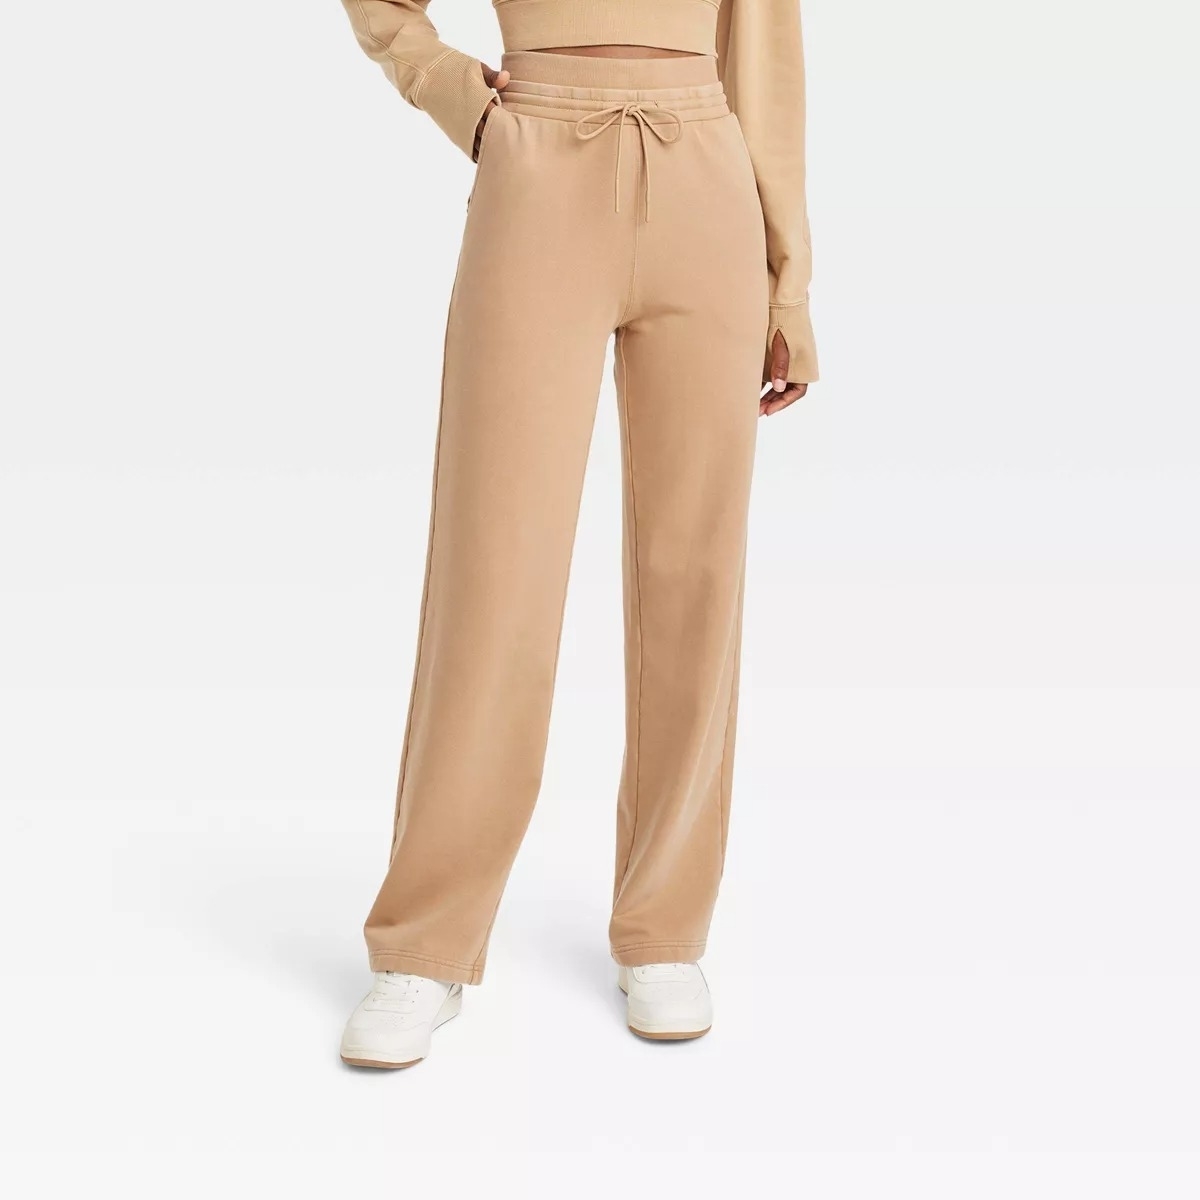 high rise sweats on model in color beige